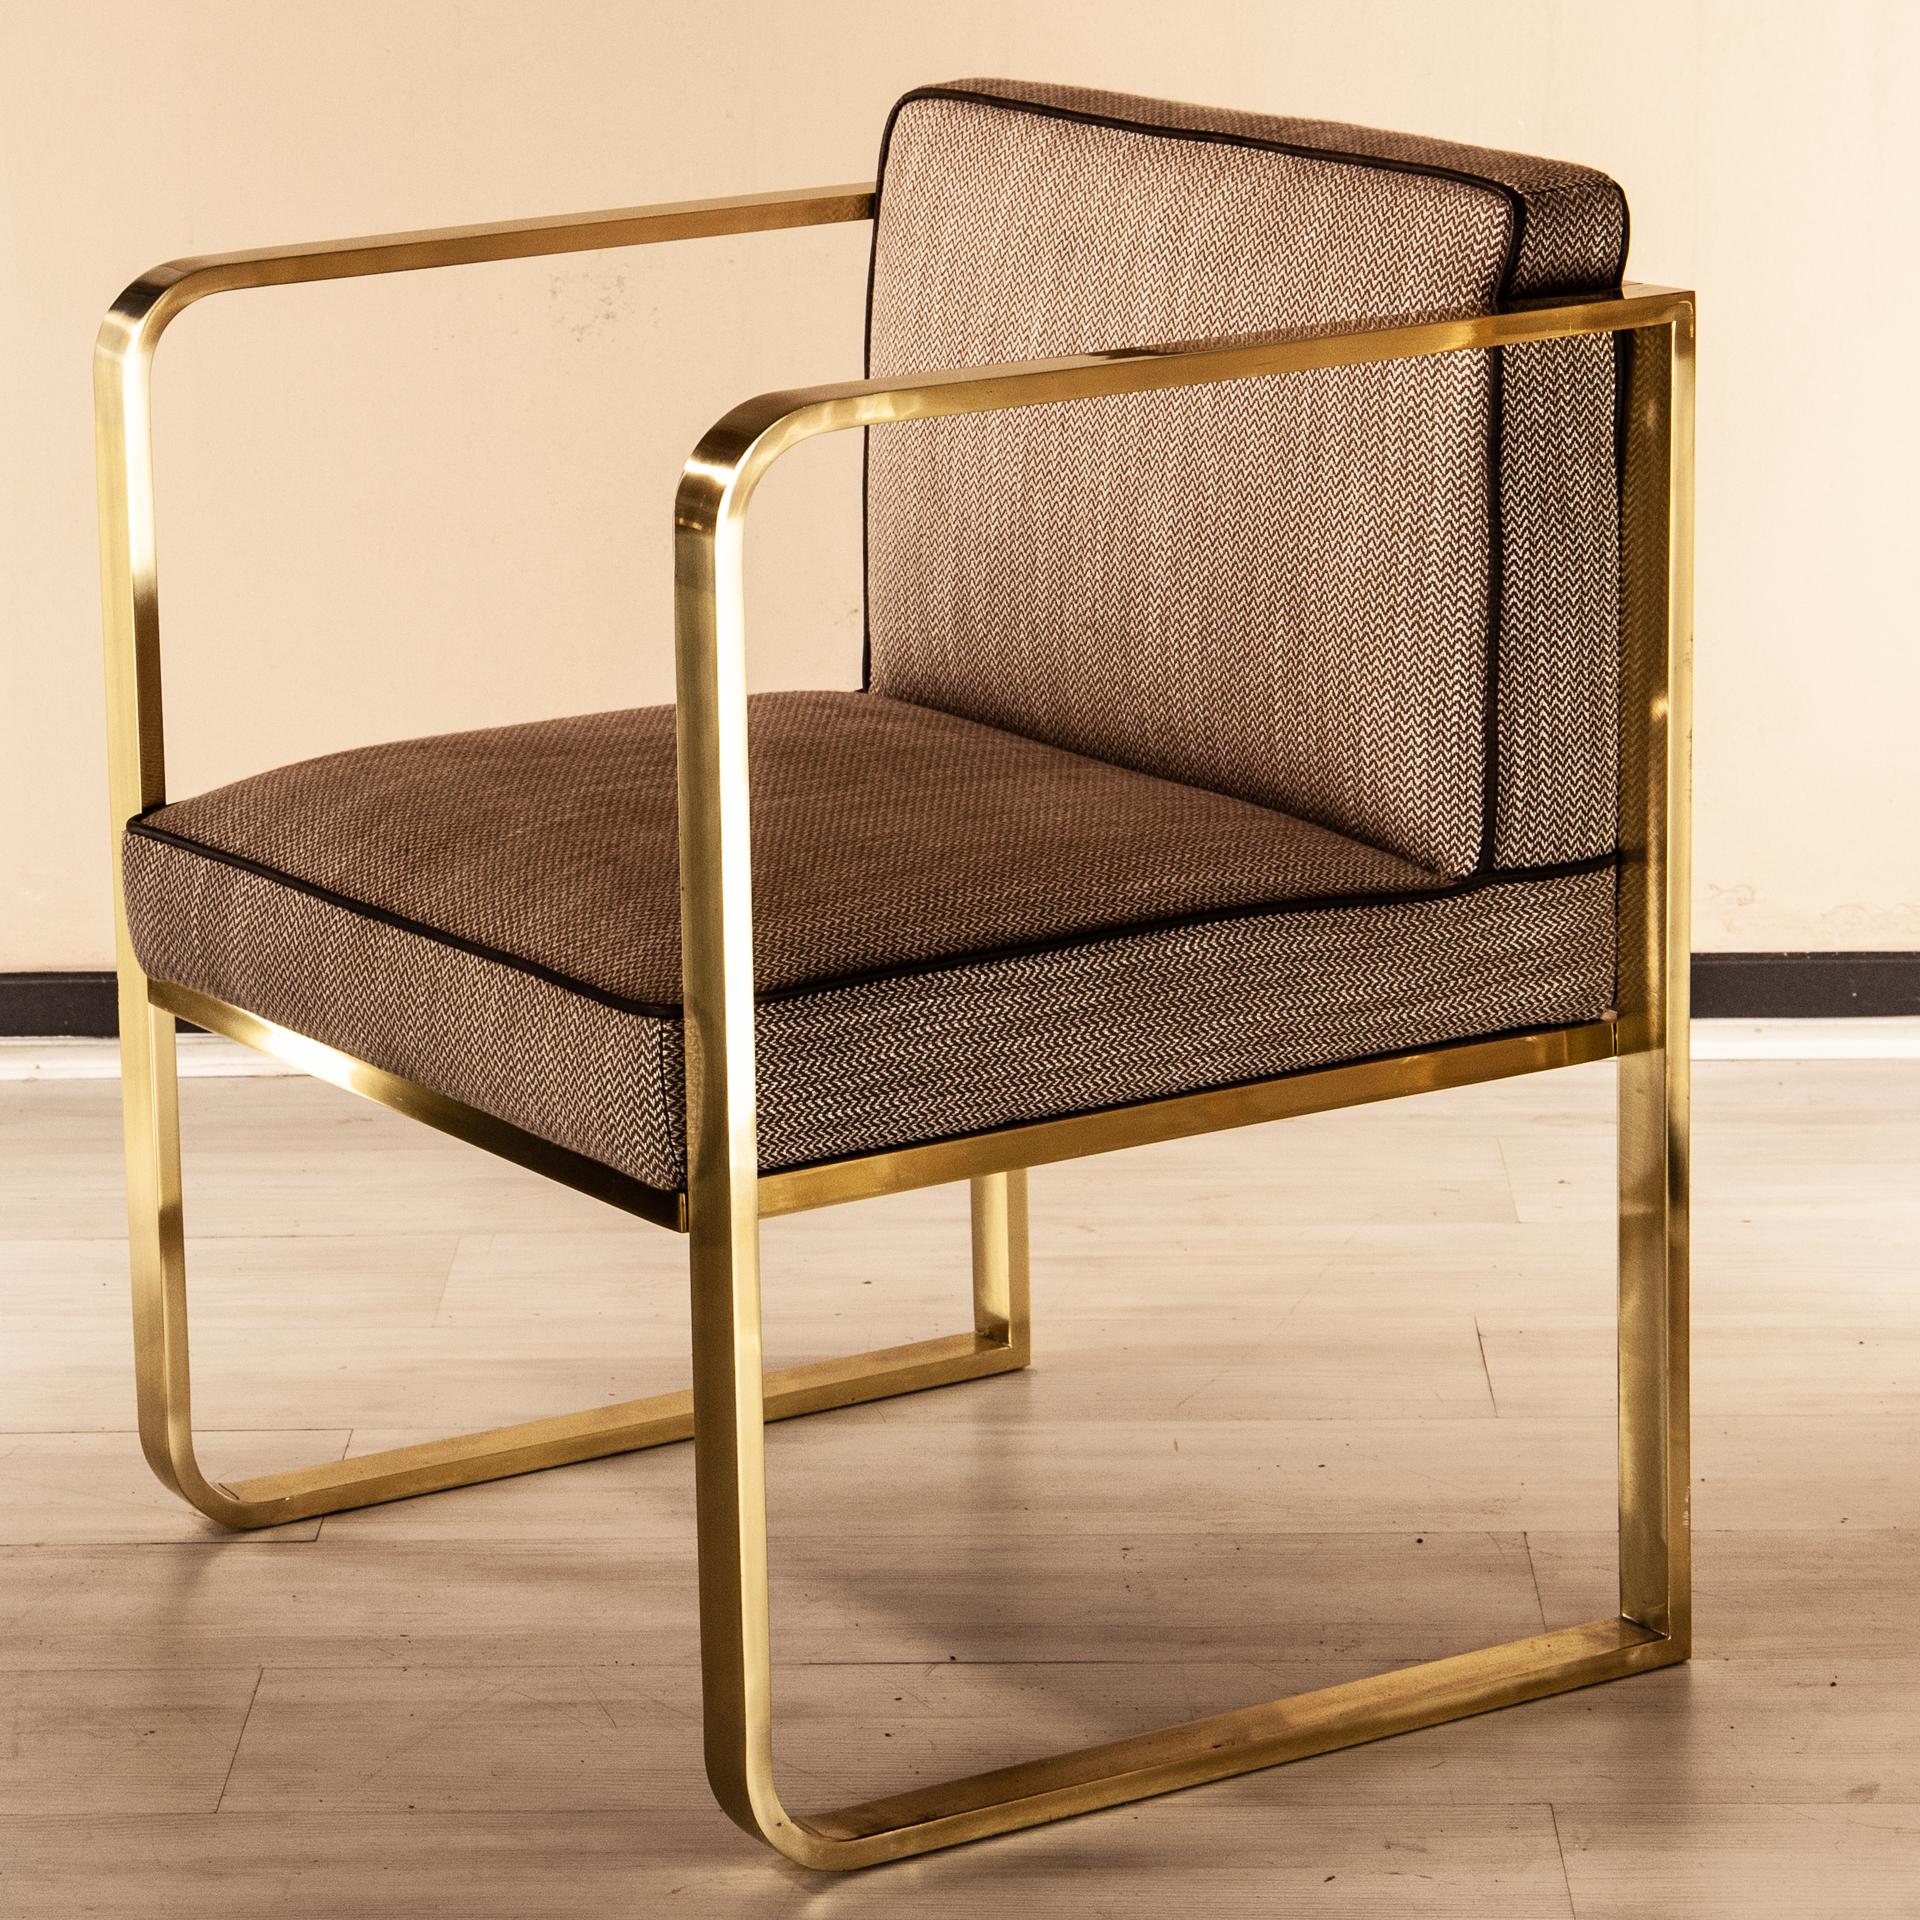 Modern design armchair made with a brass frame and upholstered in fabric.

An elegant timeless design by Selezioni Domus Firenze with a distinctive midcentury look.
Can be used as dining set with a marble-top table or an occasional chair to pick